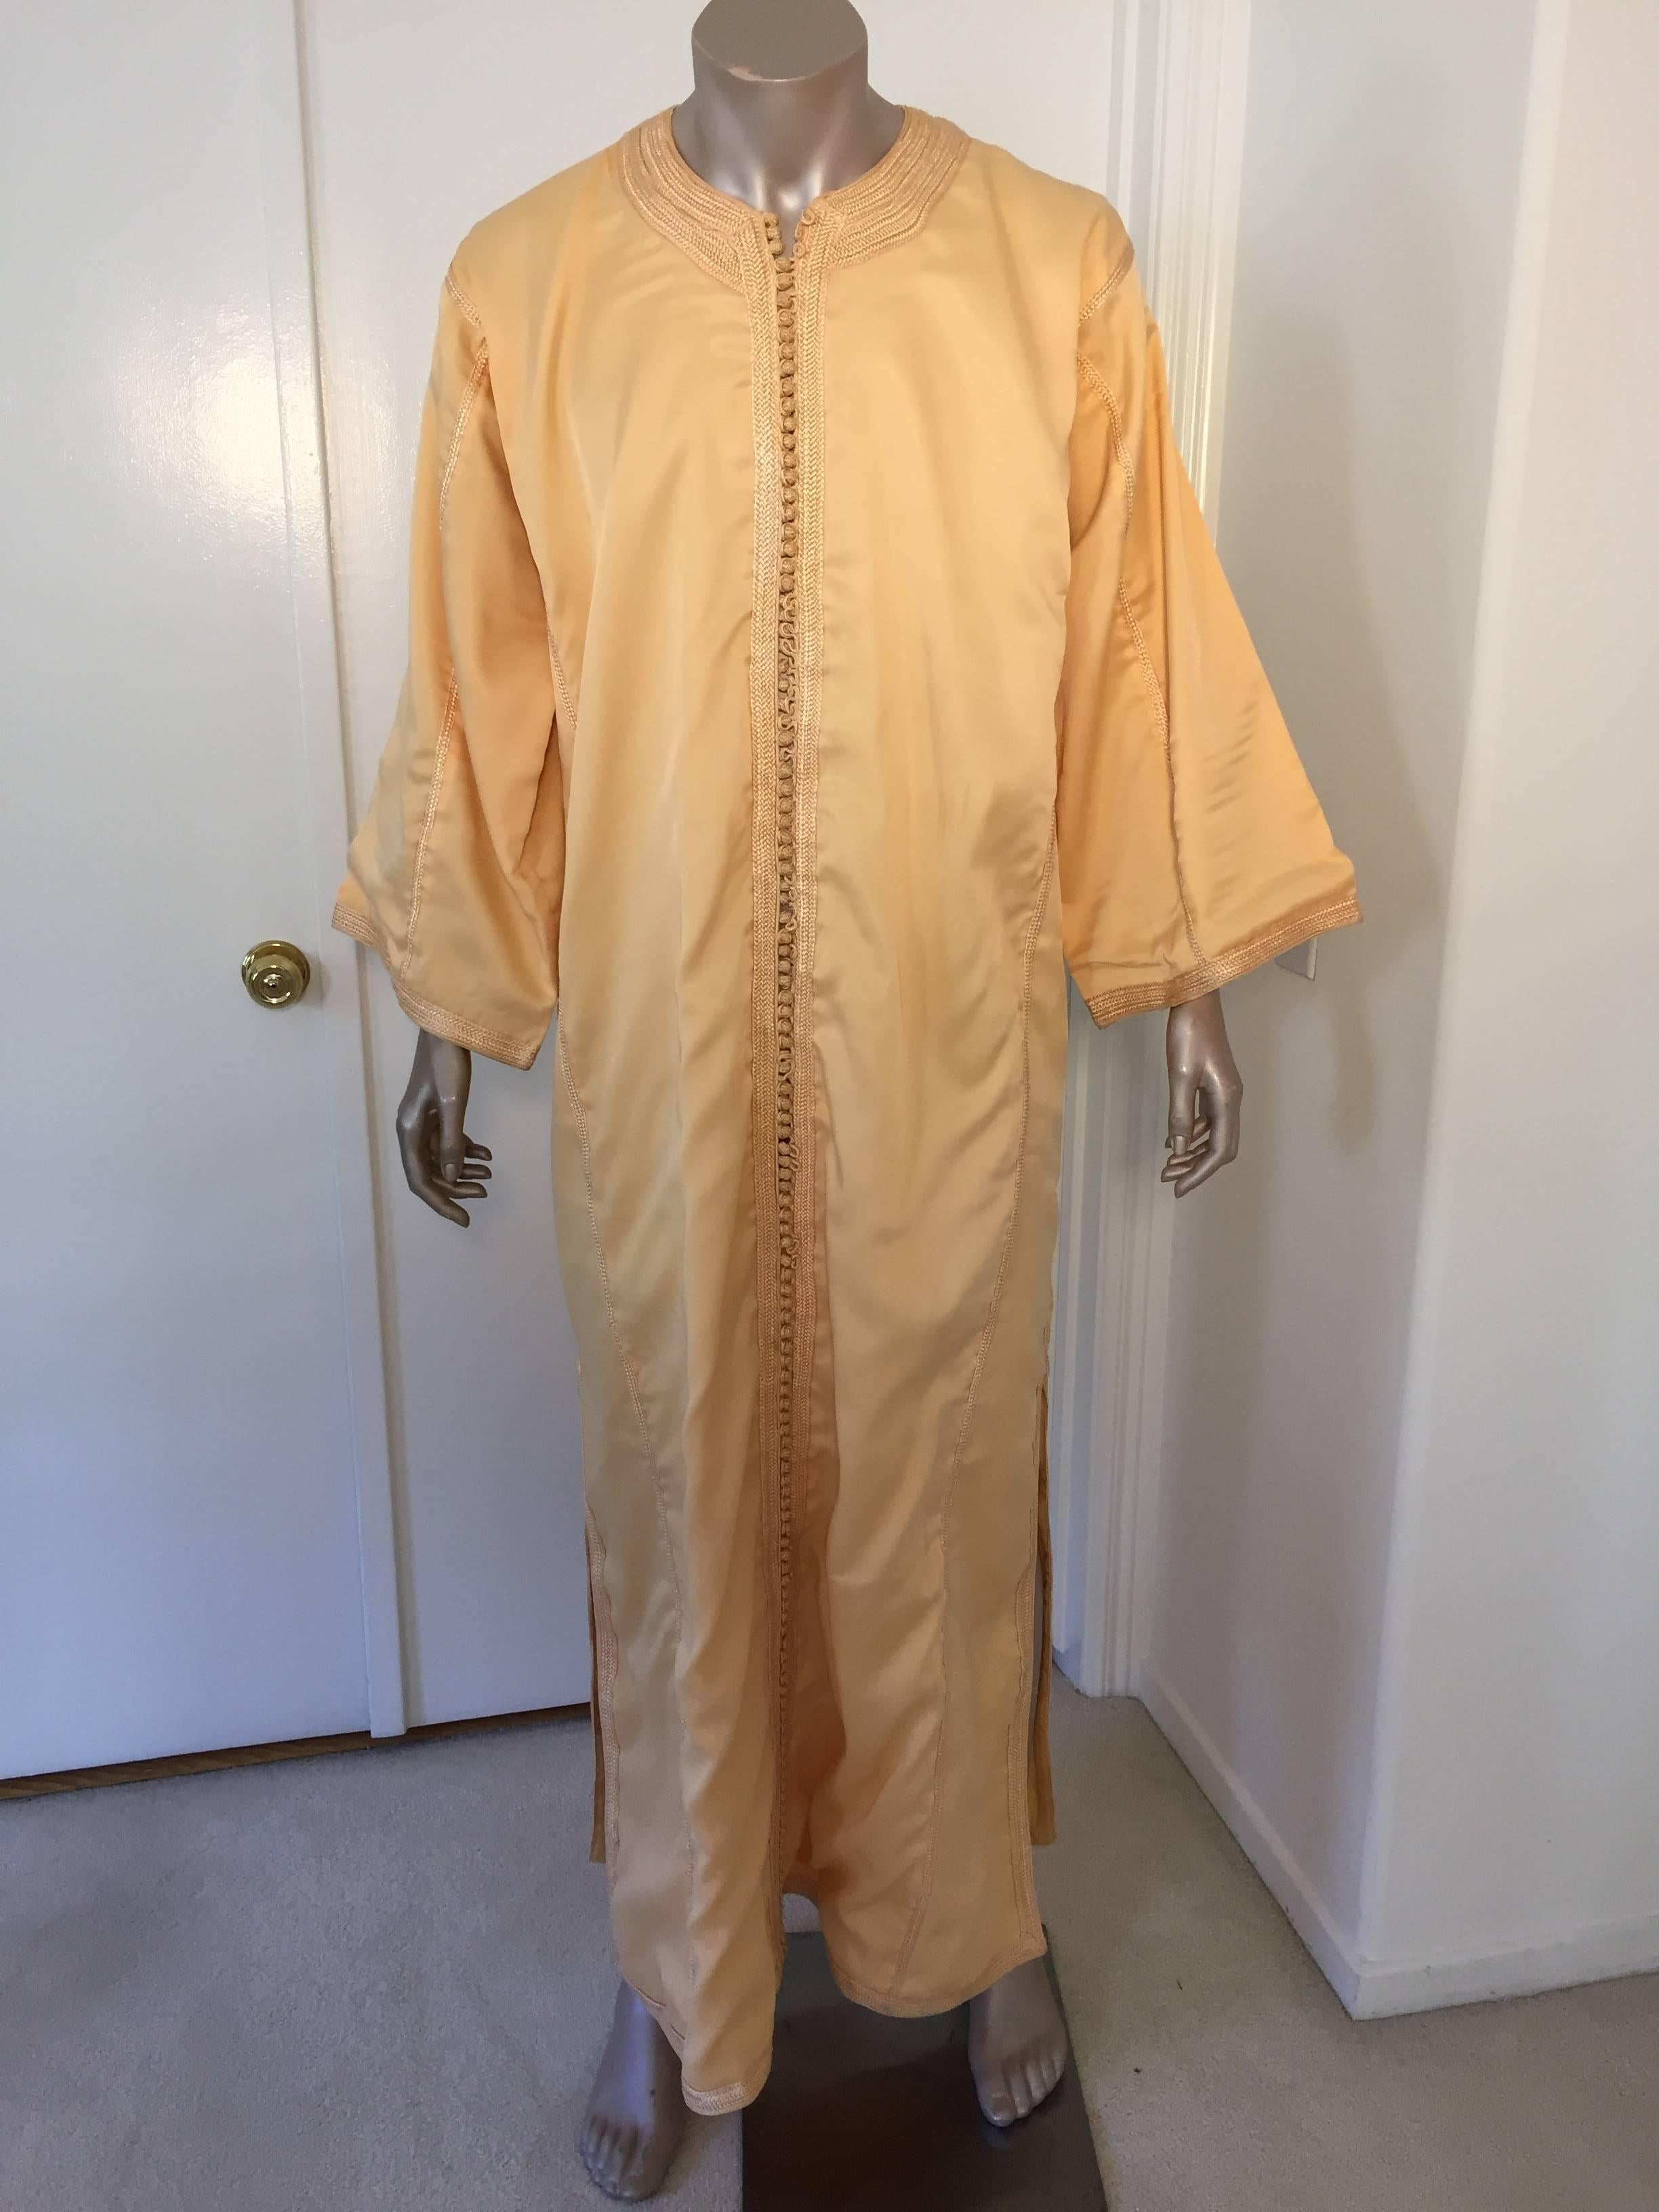 Elegant Moroccan gentleman yellow gold vintage caftan.
Moroccan caftan yellow gold vintage gentleman kaftan circa 1970.
One of a kind custom Moroccan Middle Eastern gentleman vintage gown.
This vintage African kaftan features a traditional neckline,